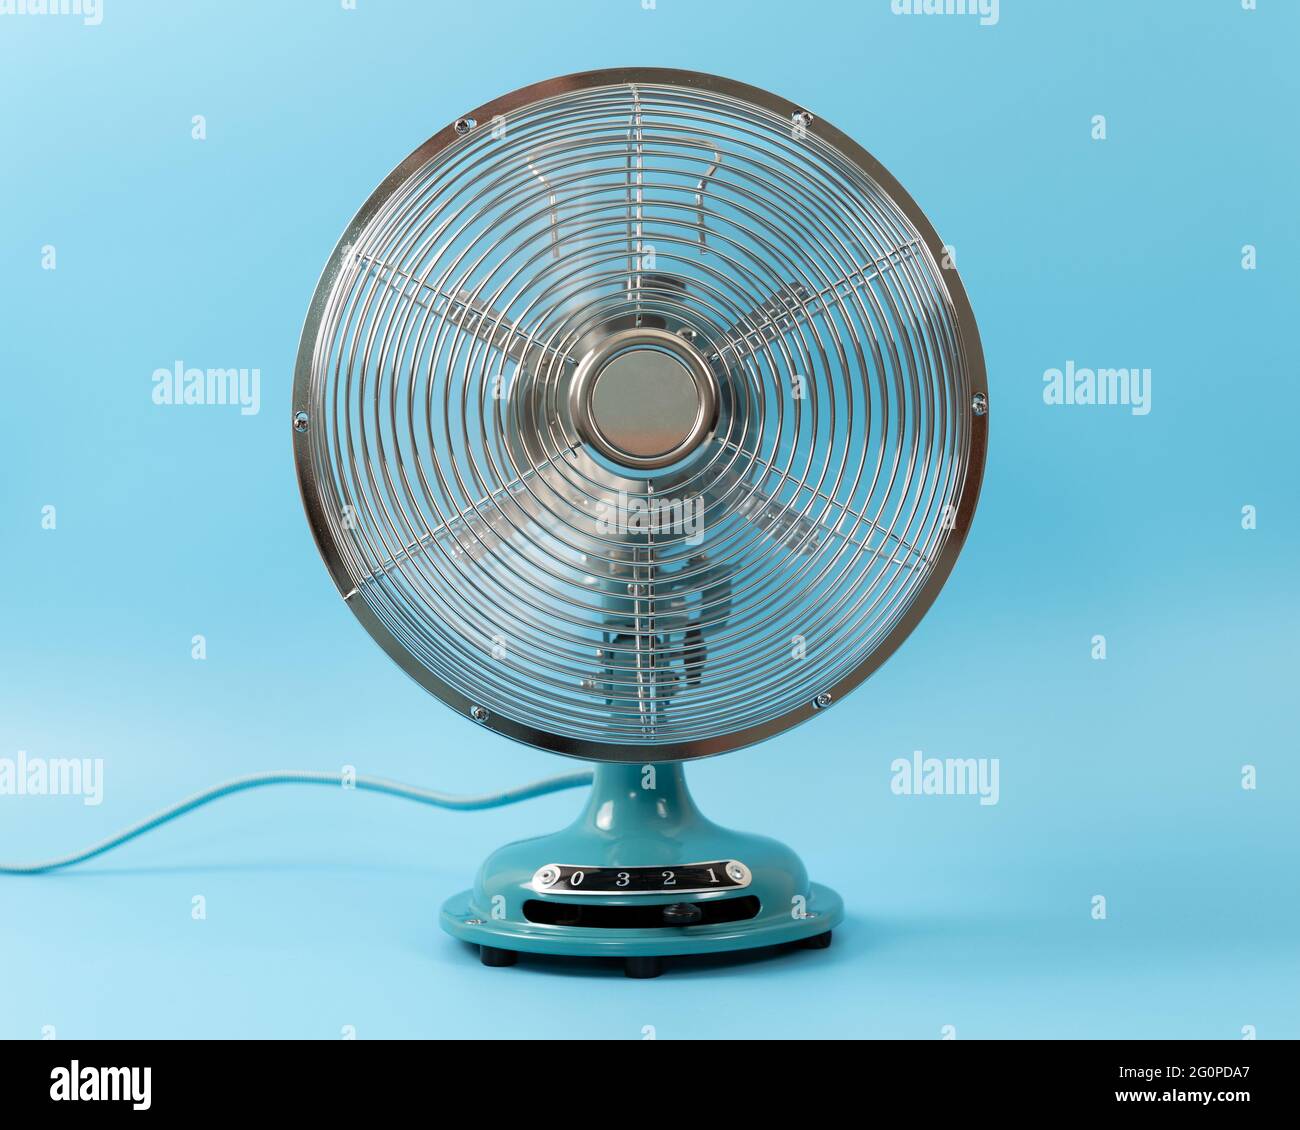 Vintage tabletop fan isolated on a blue background Stock Photo